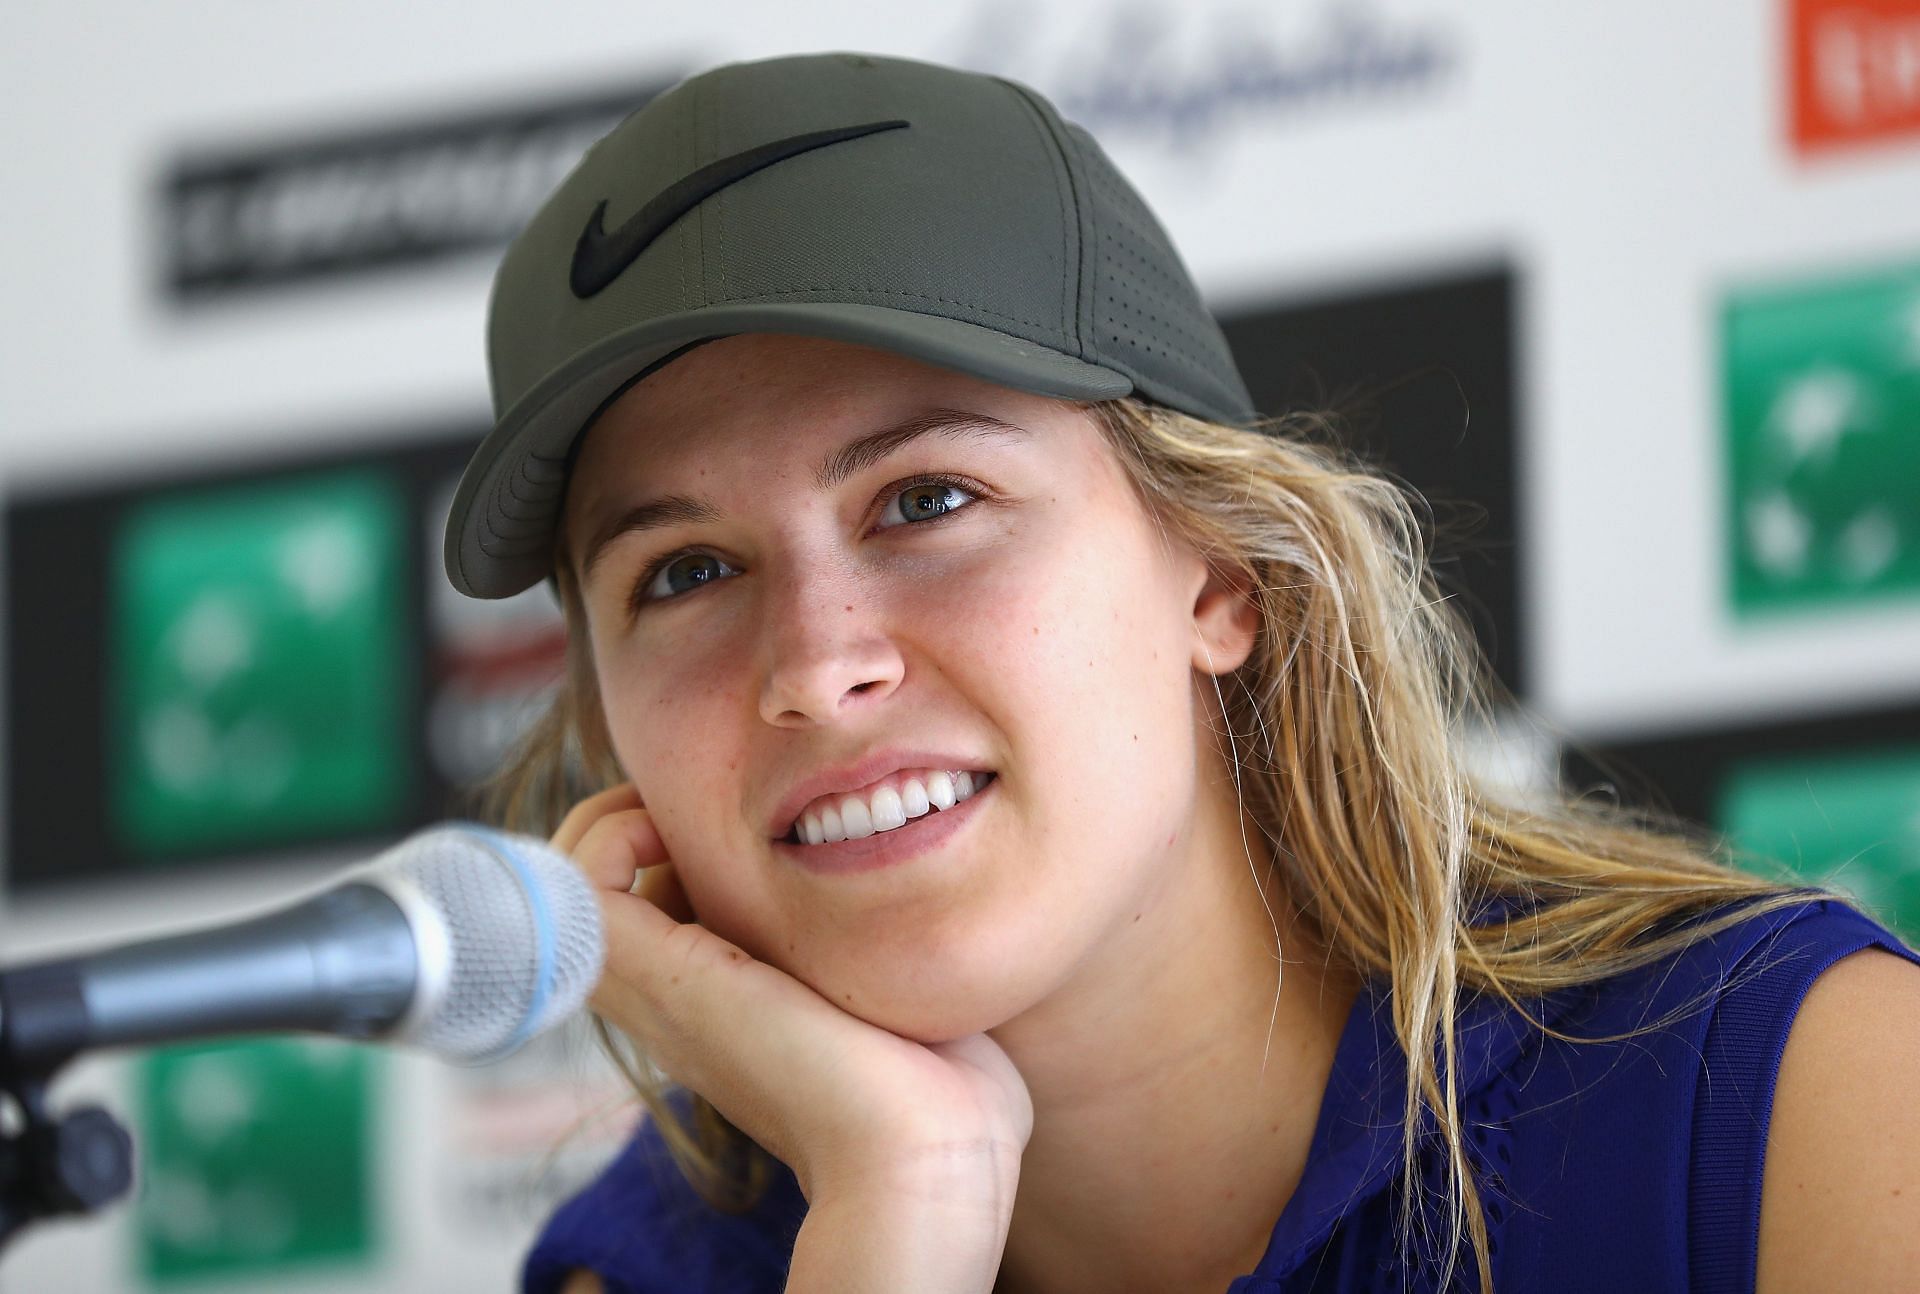 Eugenie Bouchard pictured at a press conference.